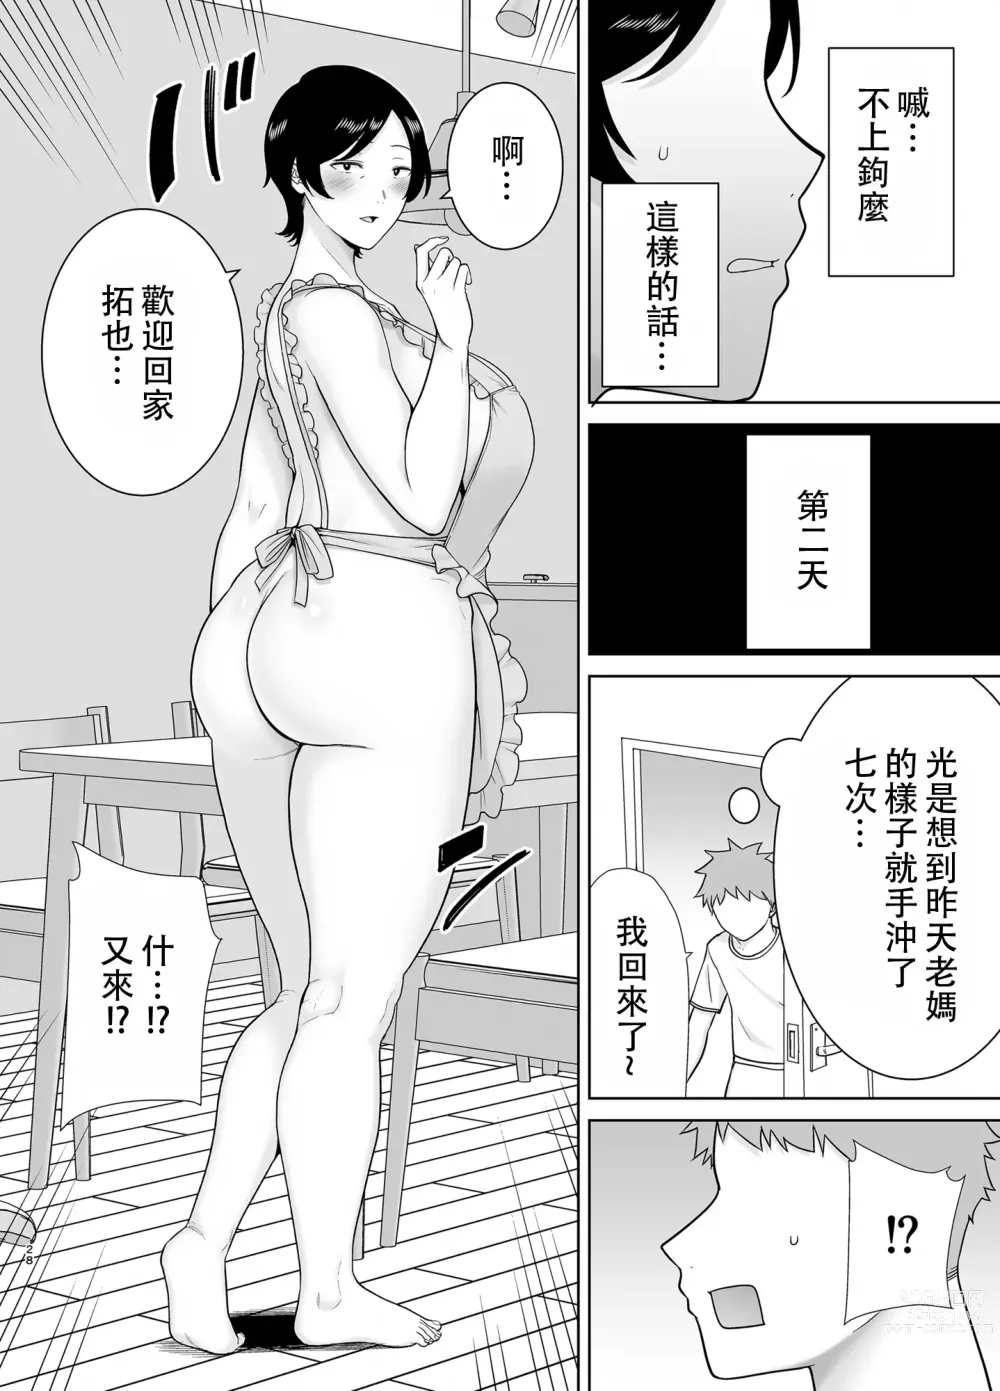 Page 27 of doujinshi 母さんだって女なんだよ！2